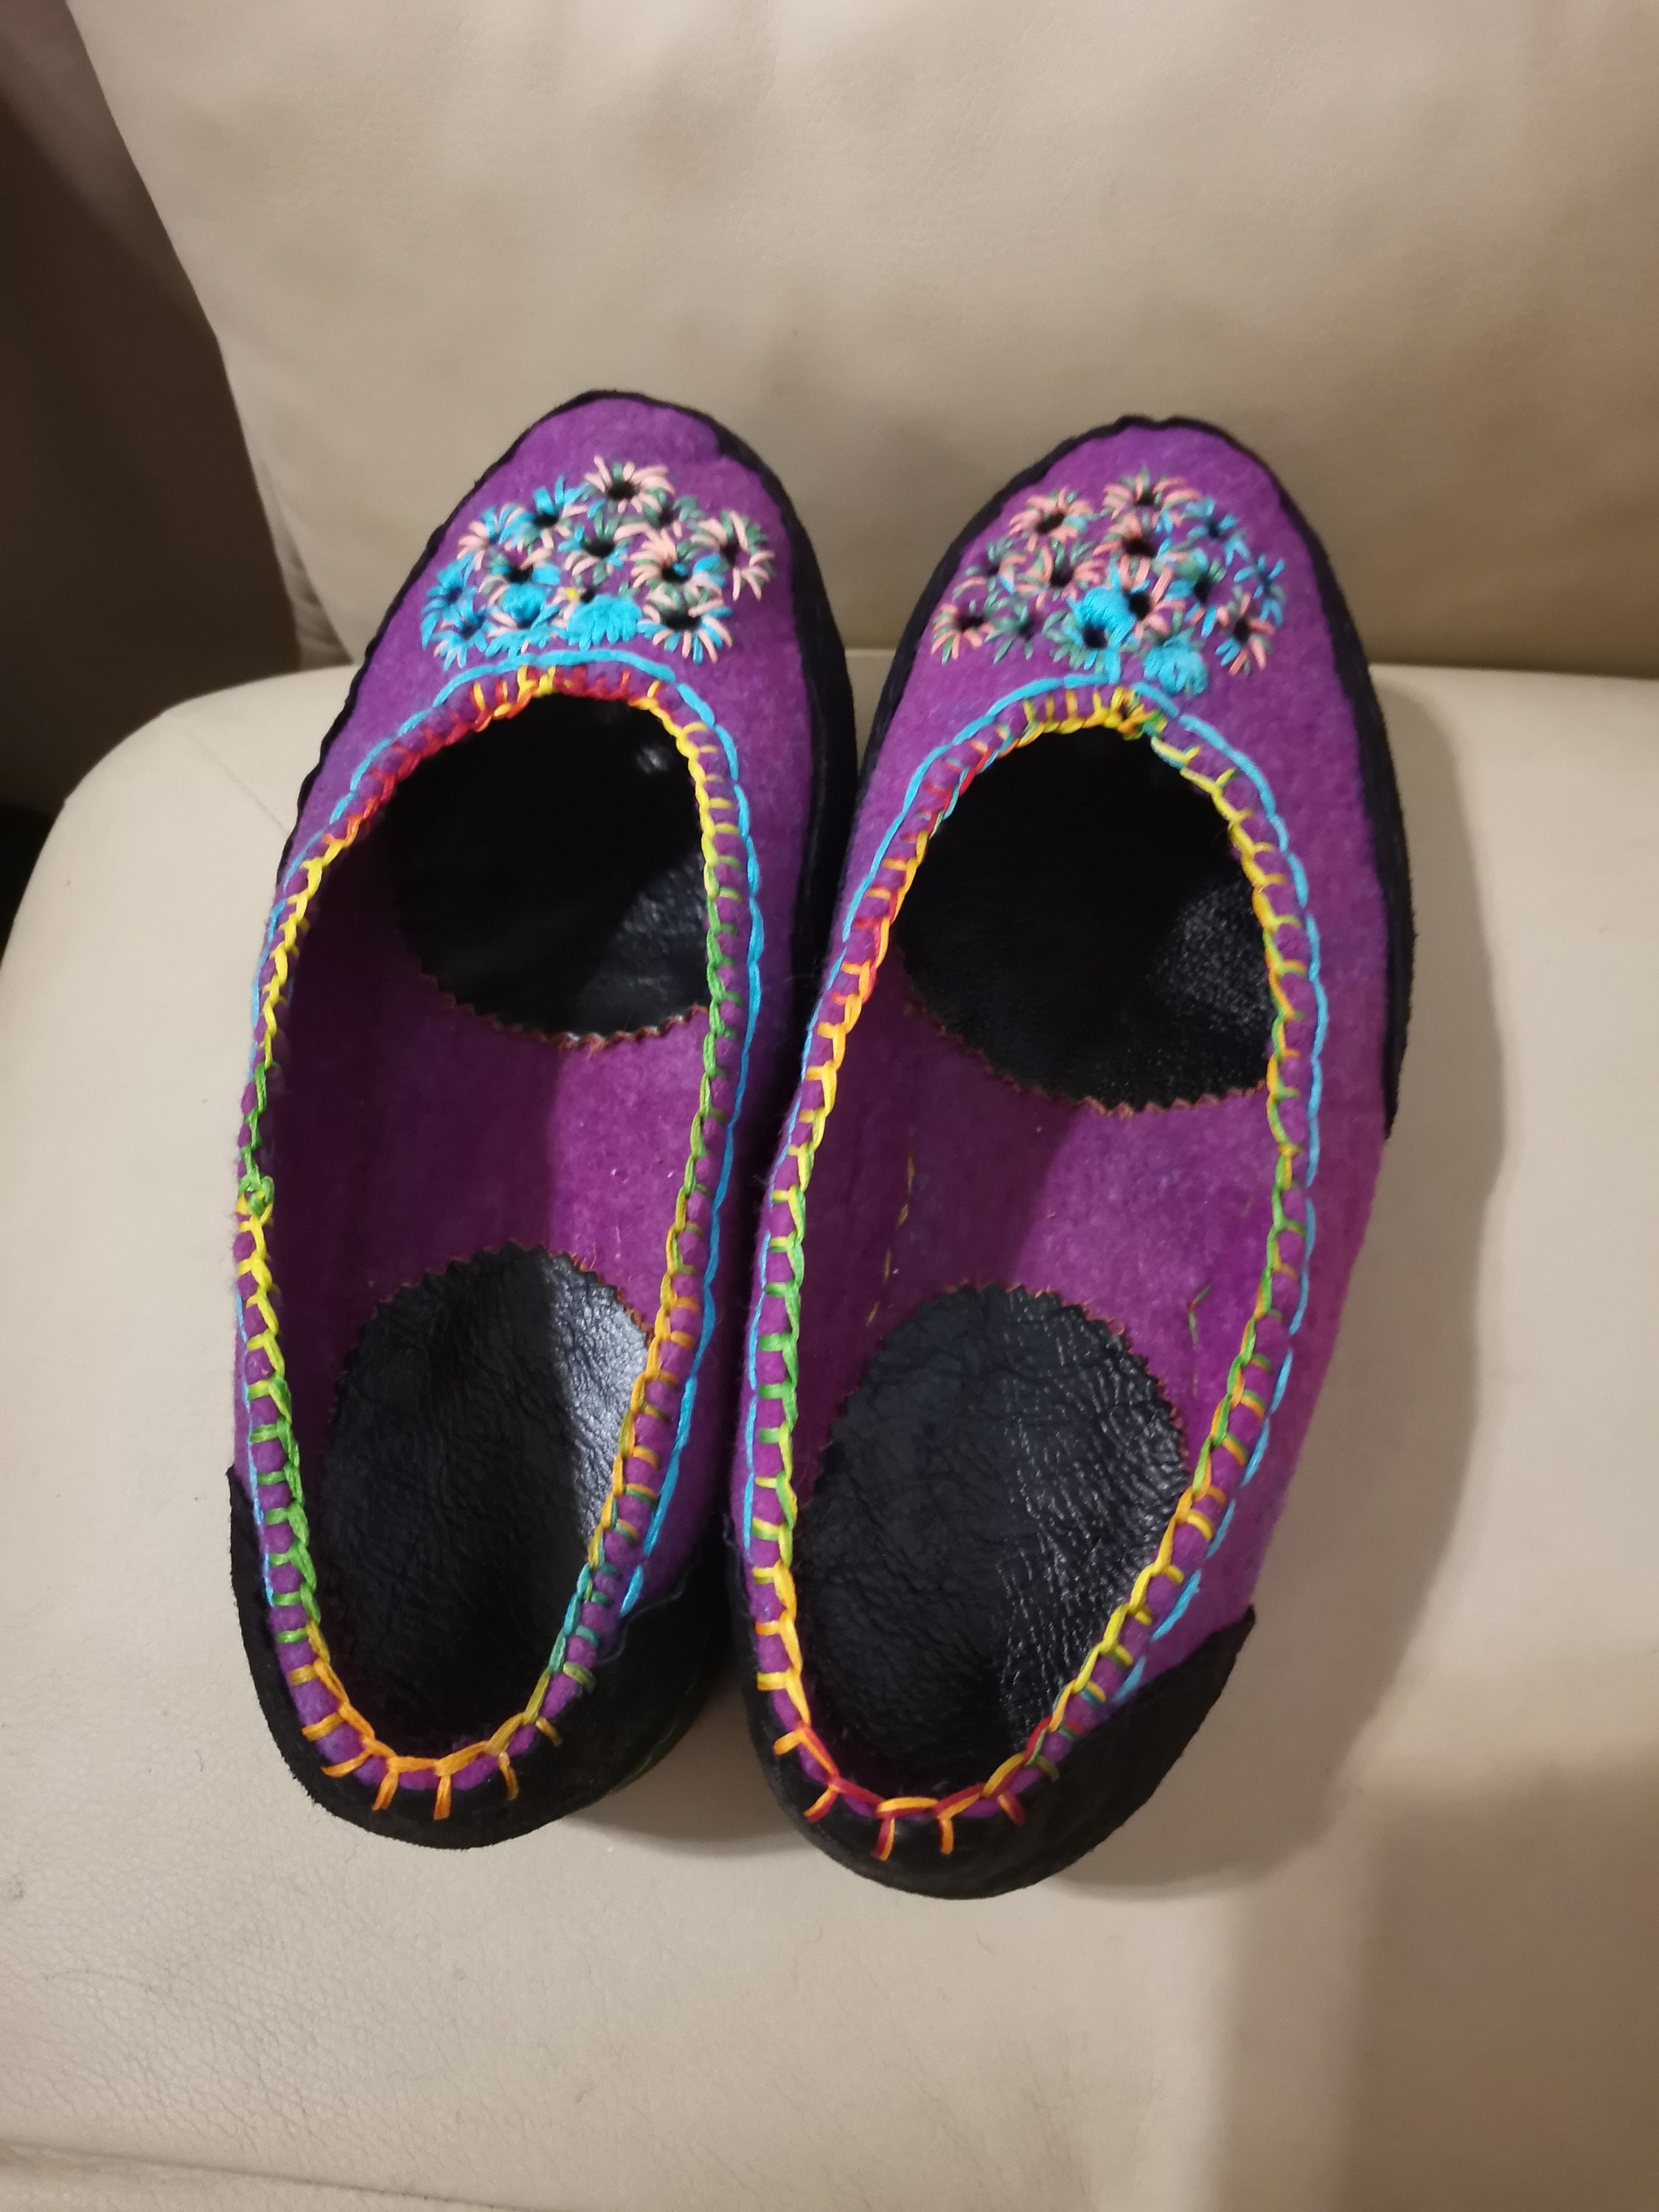 Felted women's shoes with handmade embroidery are very | Etsy